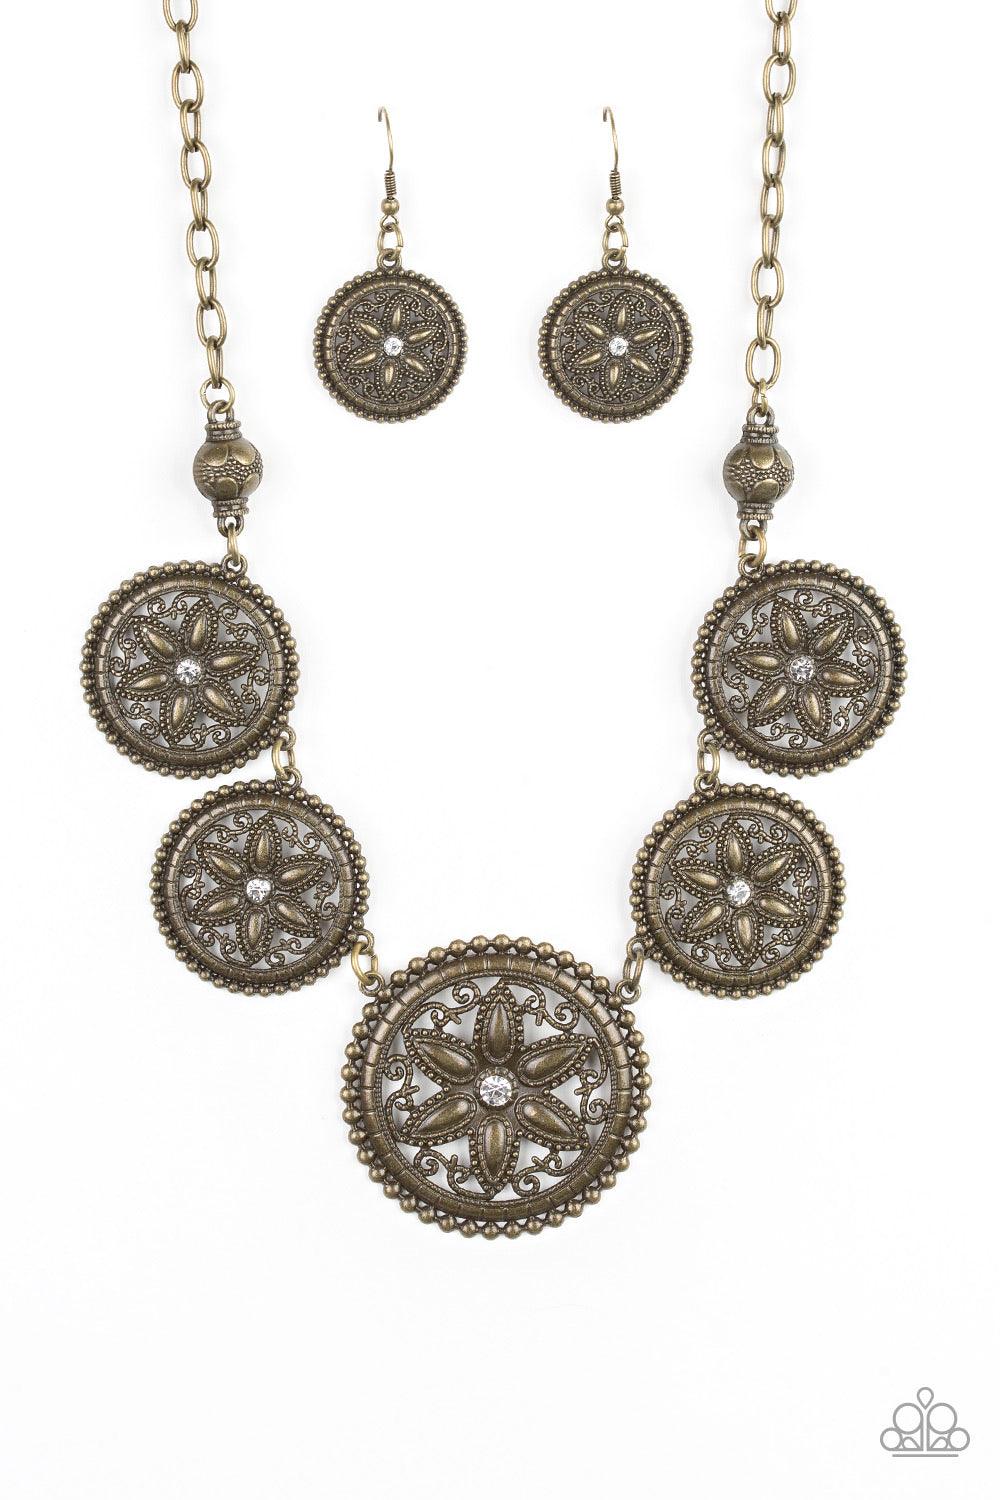 Paparazzi Accessories Written In The STAR LILLIES - Brass Dotted with glittery rhinestone centers, floral brass frames gradually increase in size as they link below the collar for a whimsical look. Features an adjustable clasp closure. Jewelry